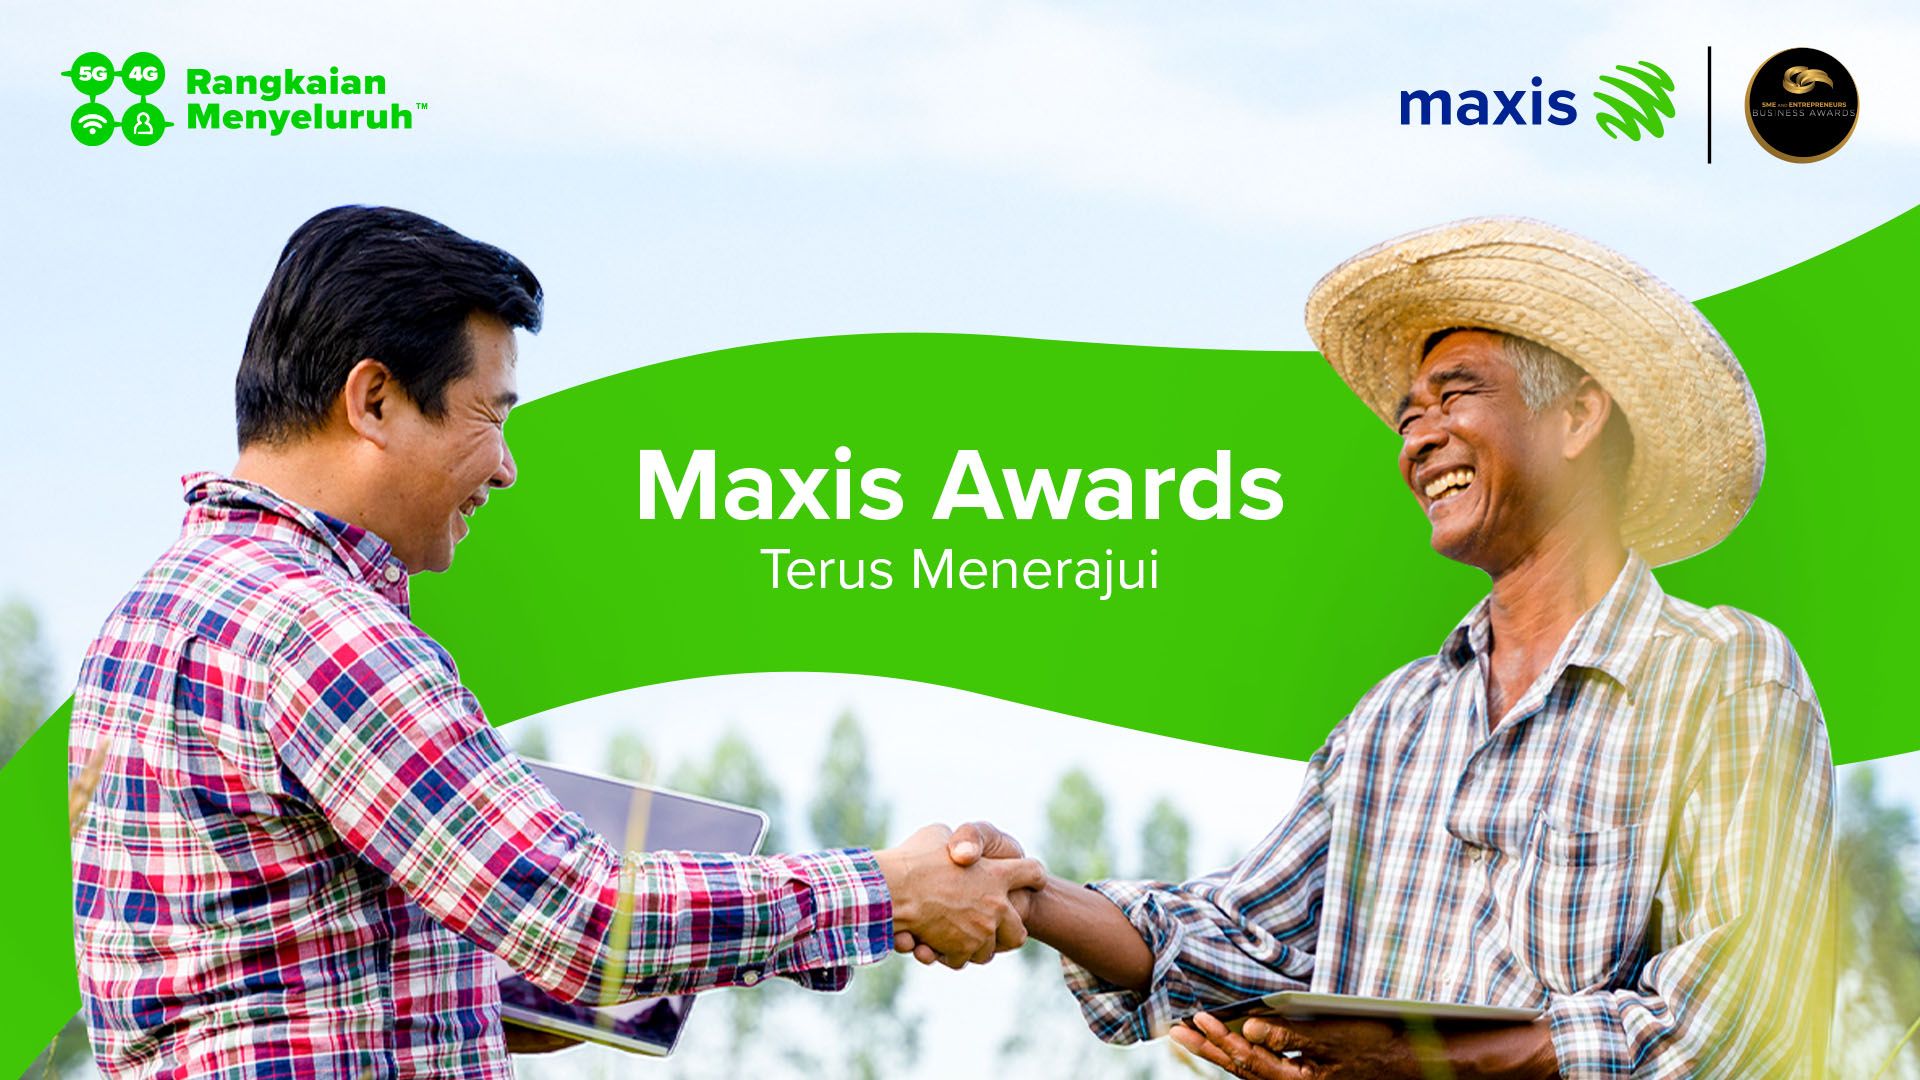 Maxis Awards returns with call for proposal submissions